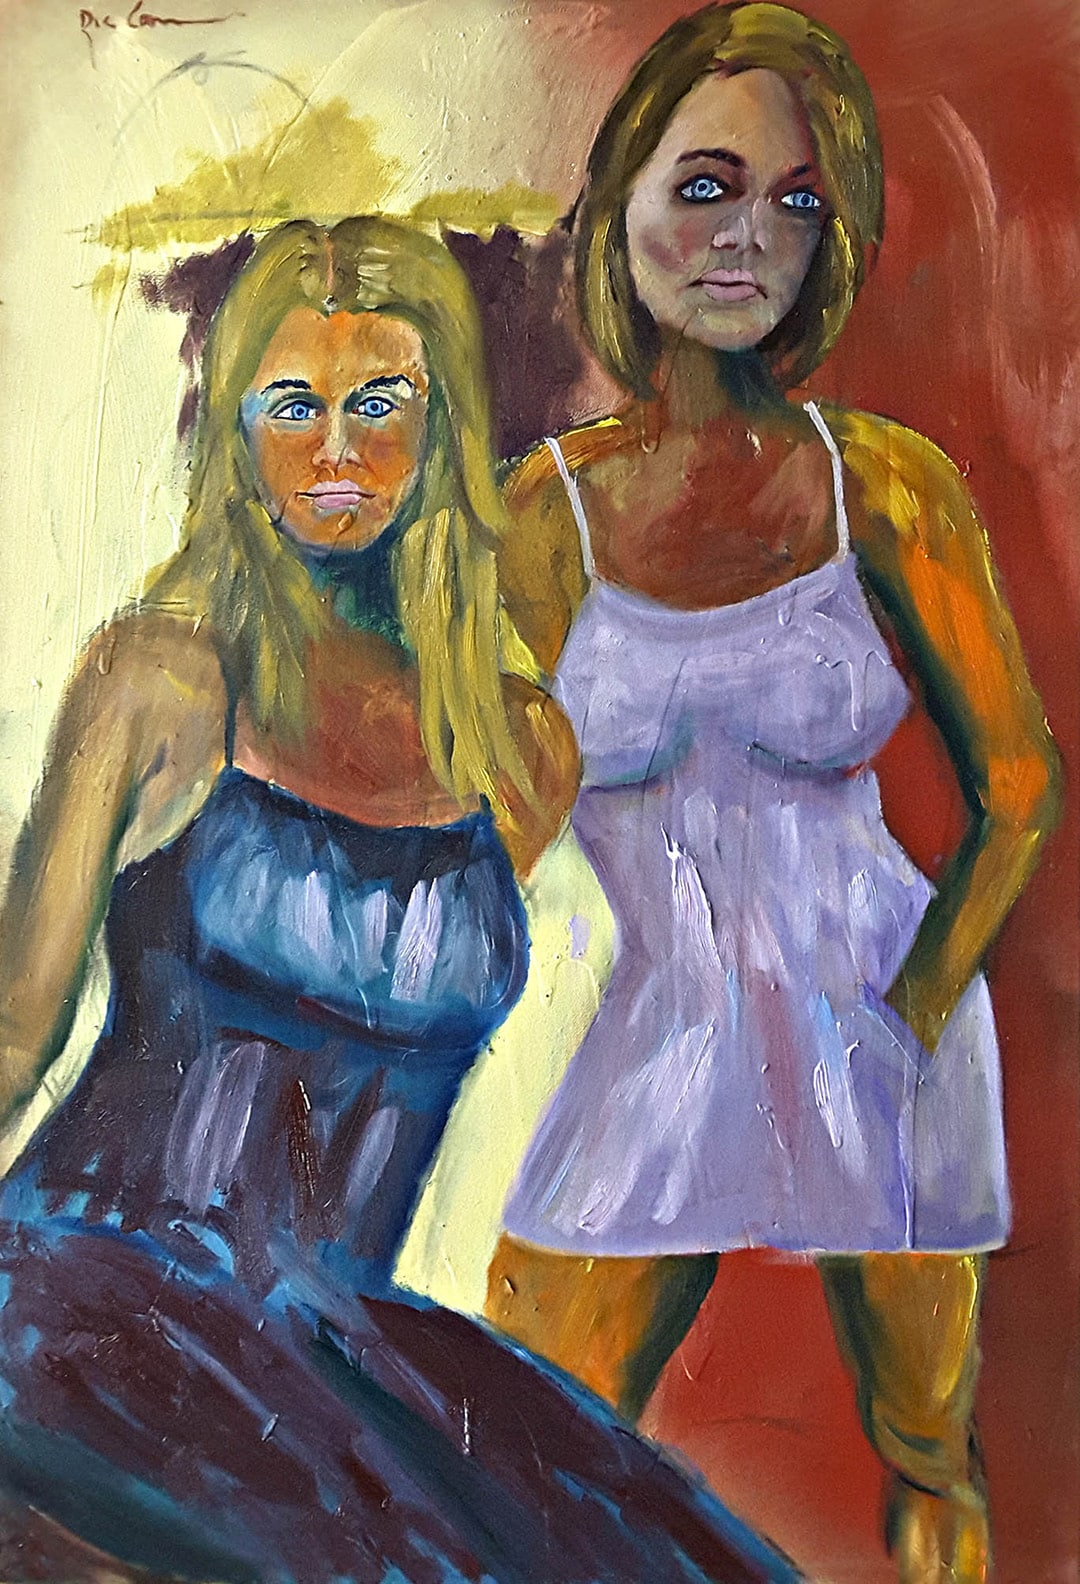 "2 Sisters" by Ric Conn